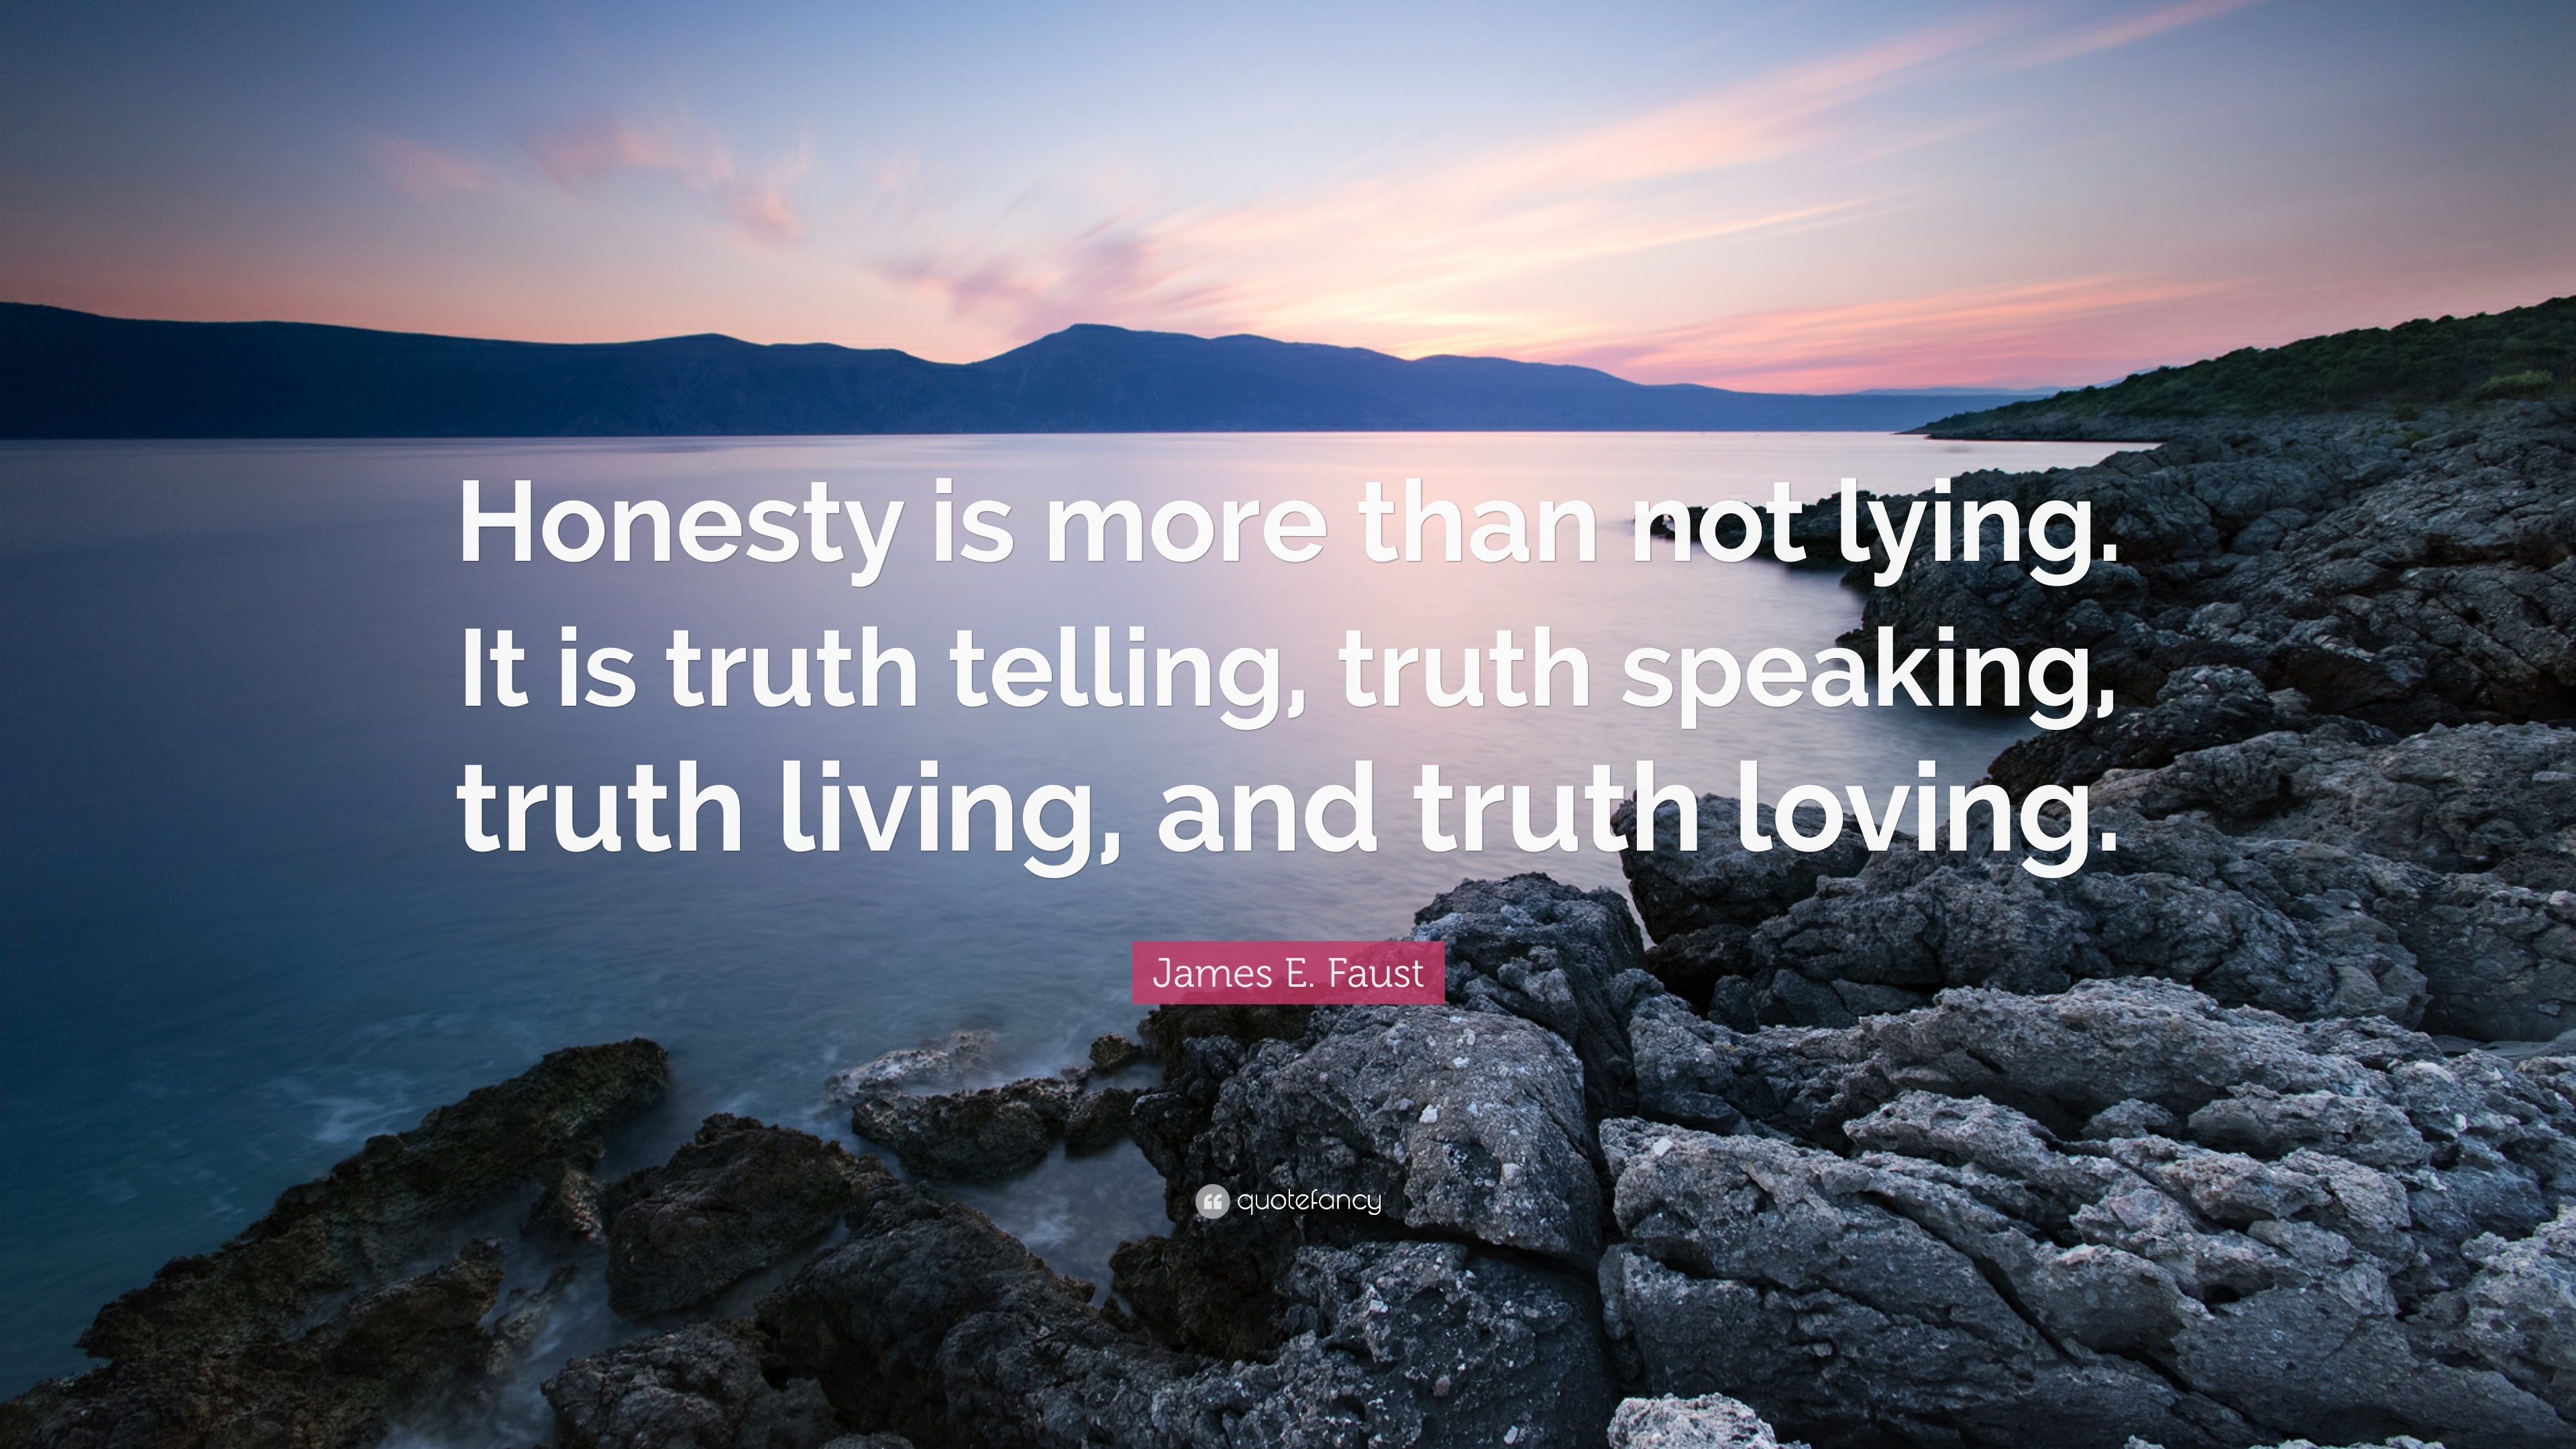 truth honesty lying quote telling speaking faust than james living loving wallpapers quotefancy